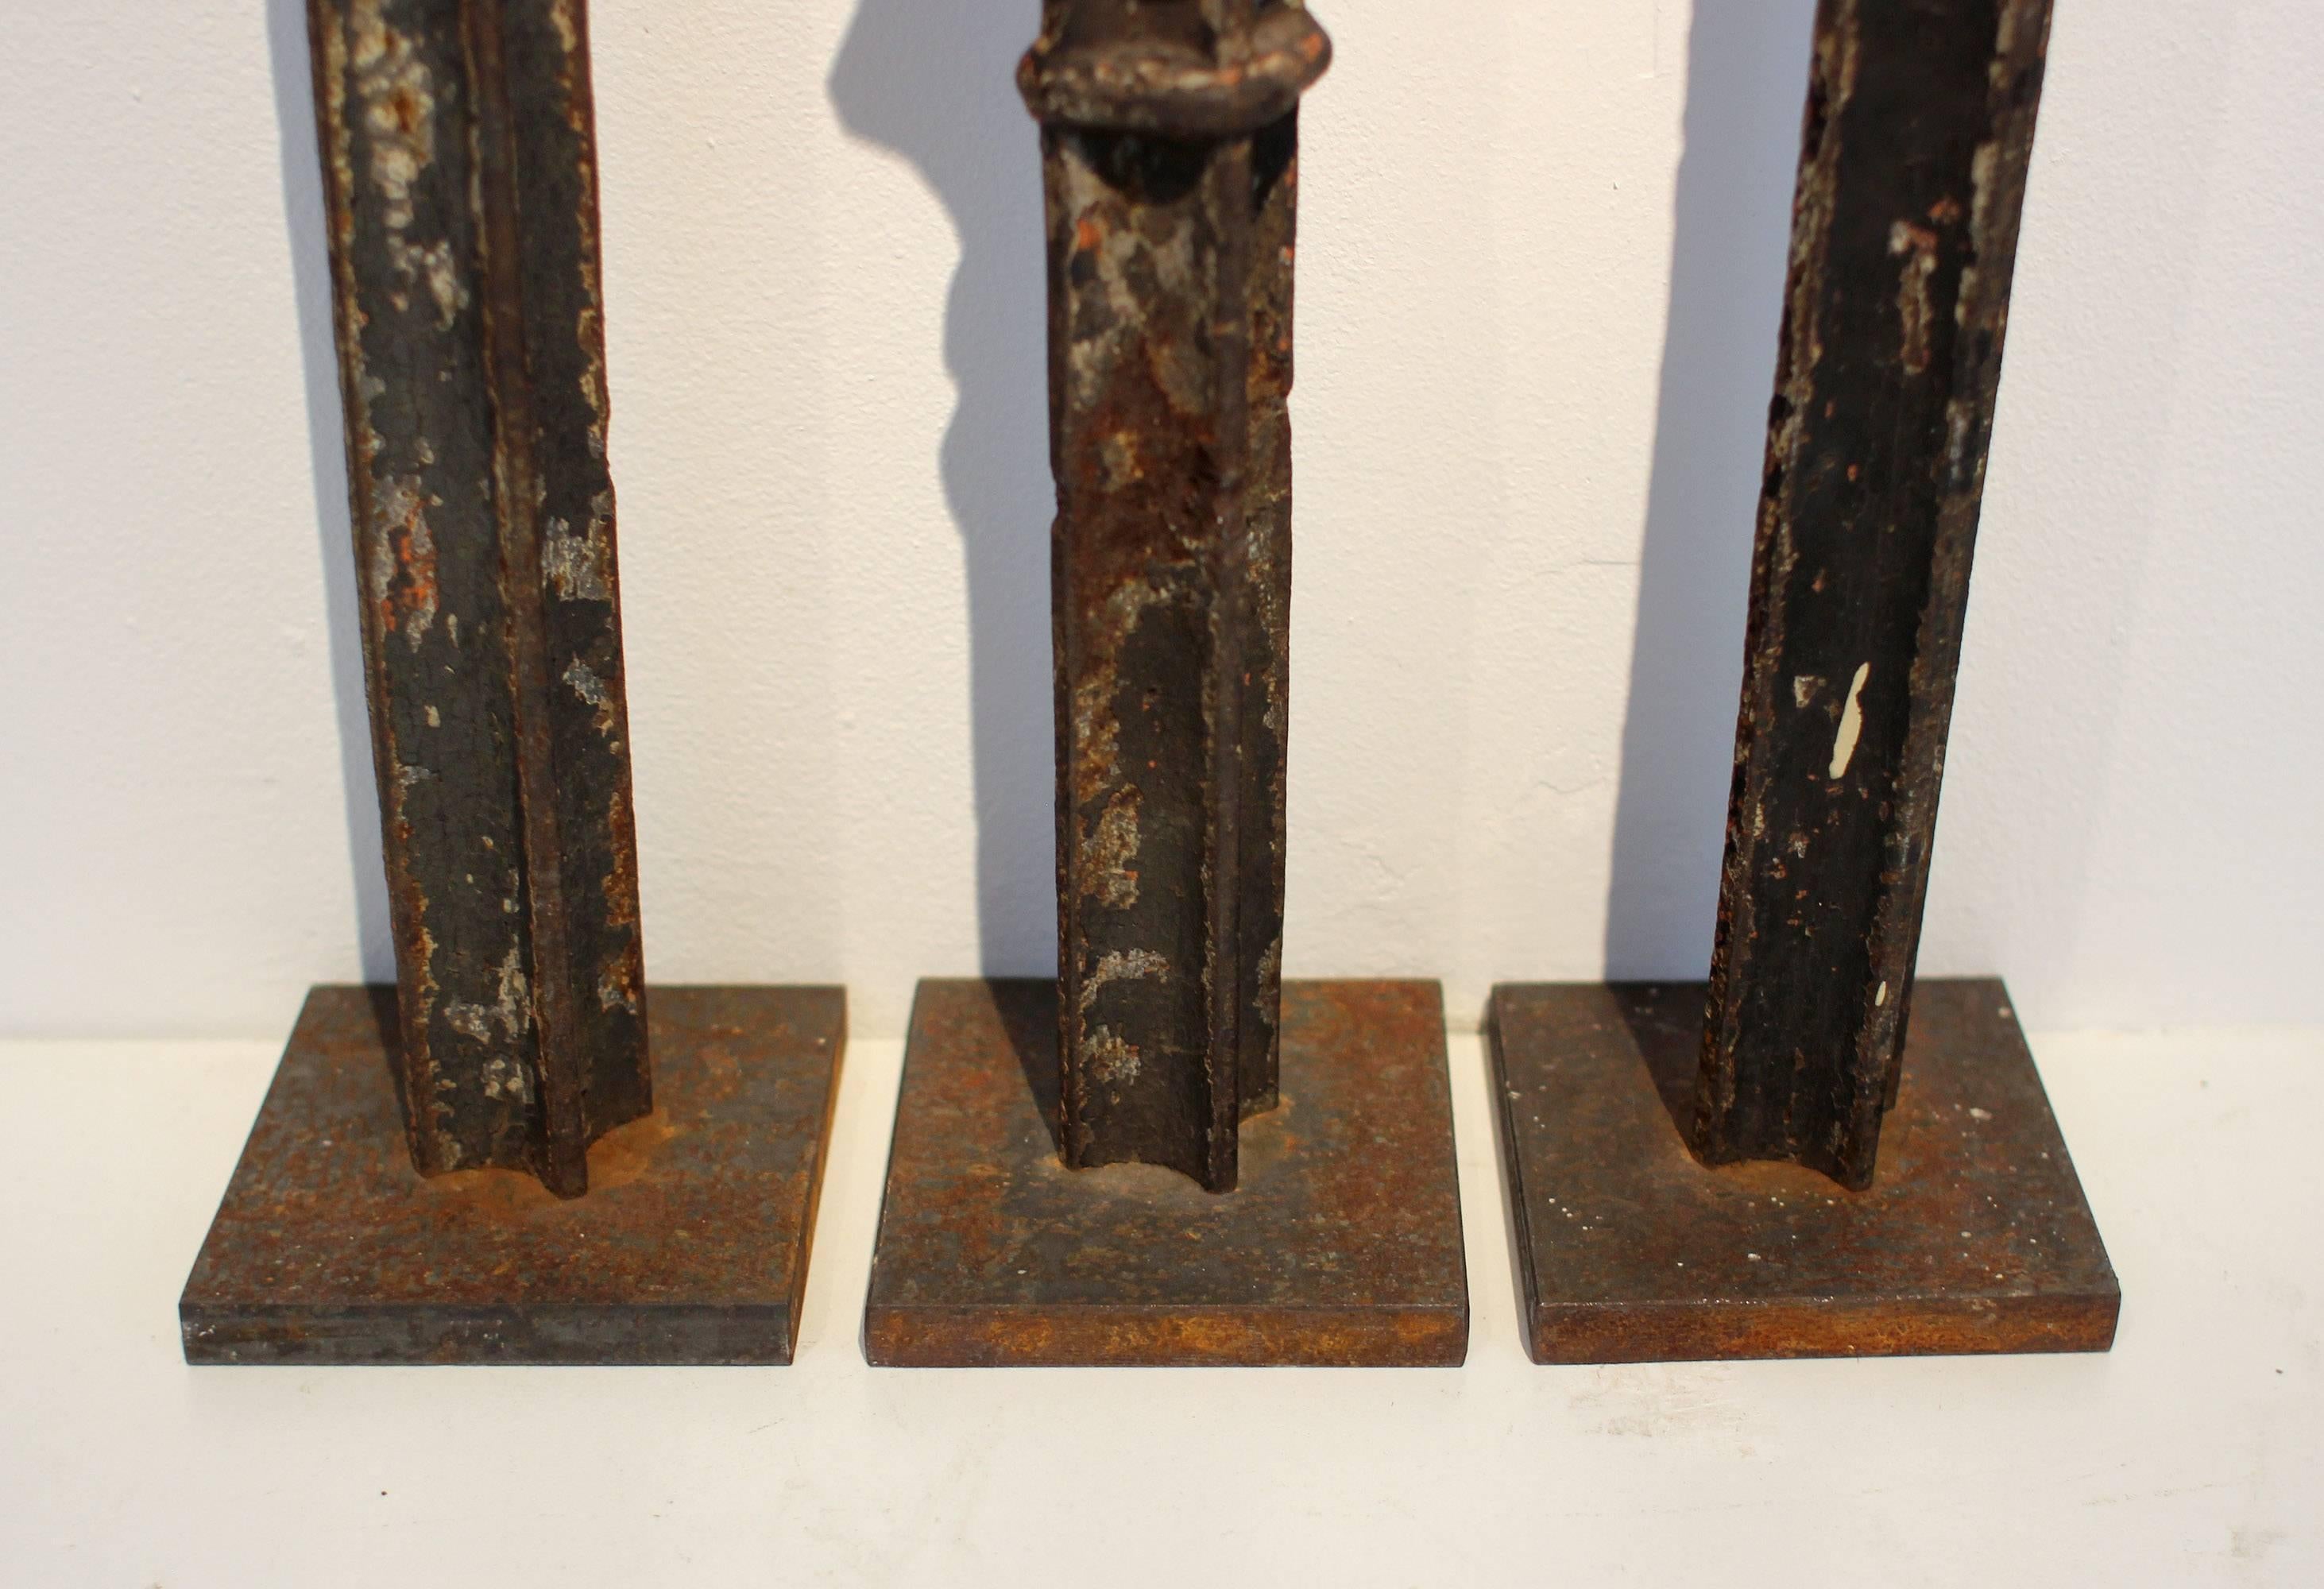 Folk Art Set of Three Iron Fence Post Toppers, Probably American, 19th Century